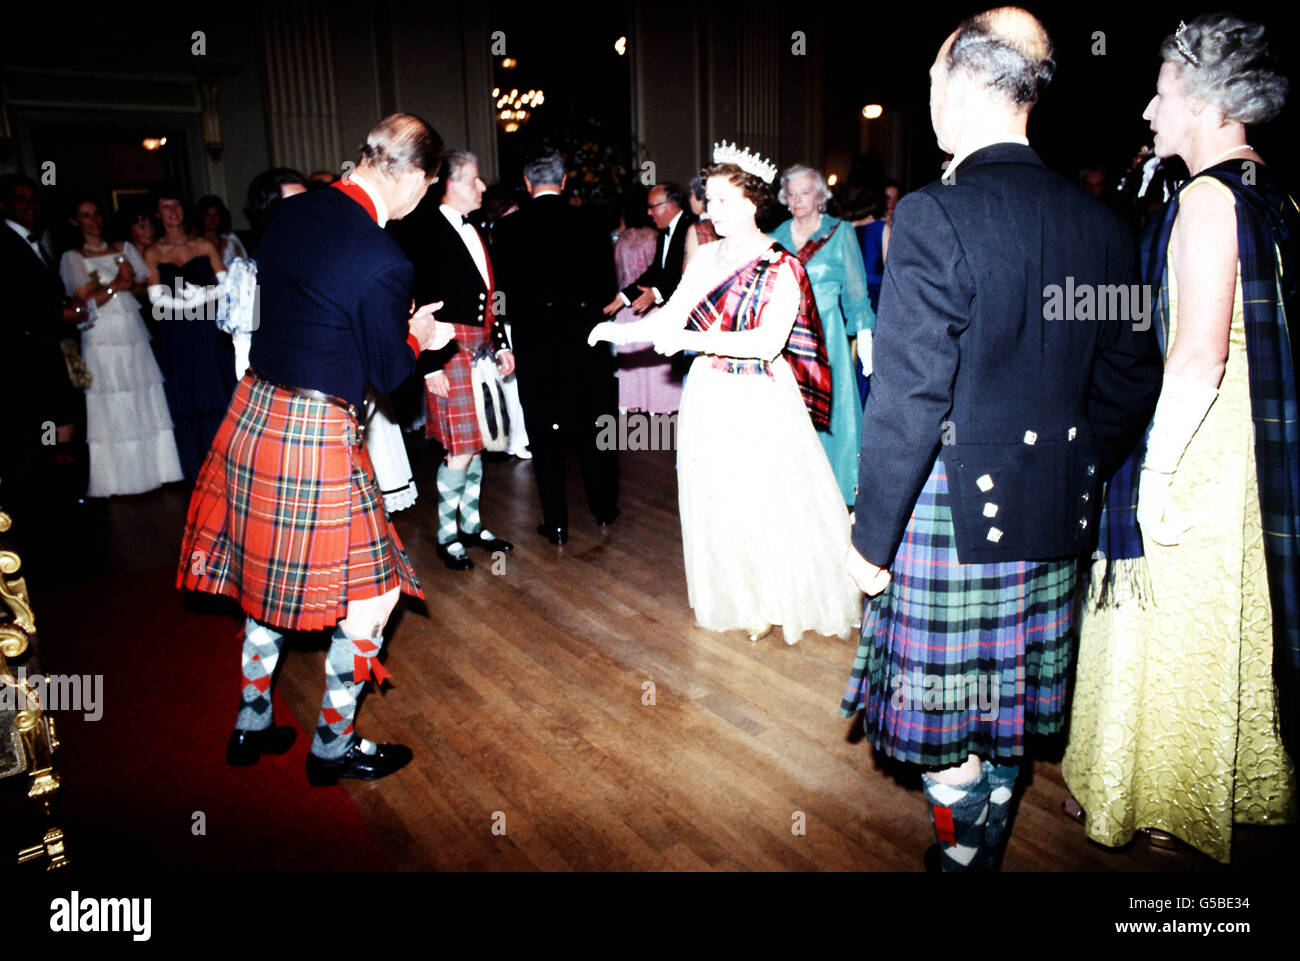 Queen Elizabeth II, in a white dress and tartan sash, takes to the floor with the Duke of Edinburgh, in kilt, during the Centenary Ball of the Scottish Pipers' Society at the Assembly Room, Edinburgh, during their 7 day visit to Scotland. Stock Photo